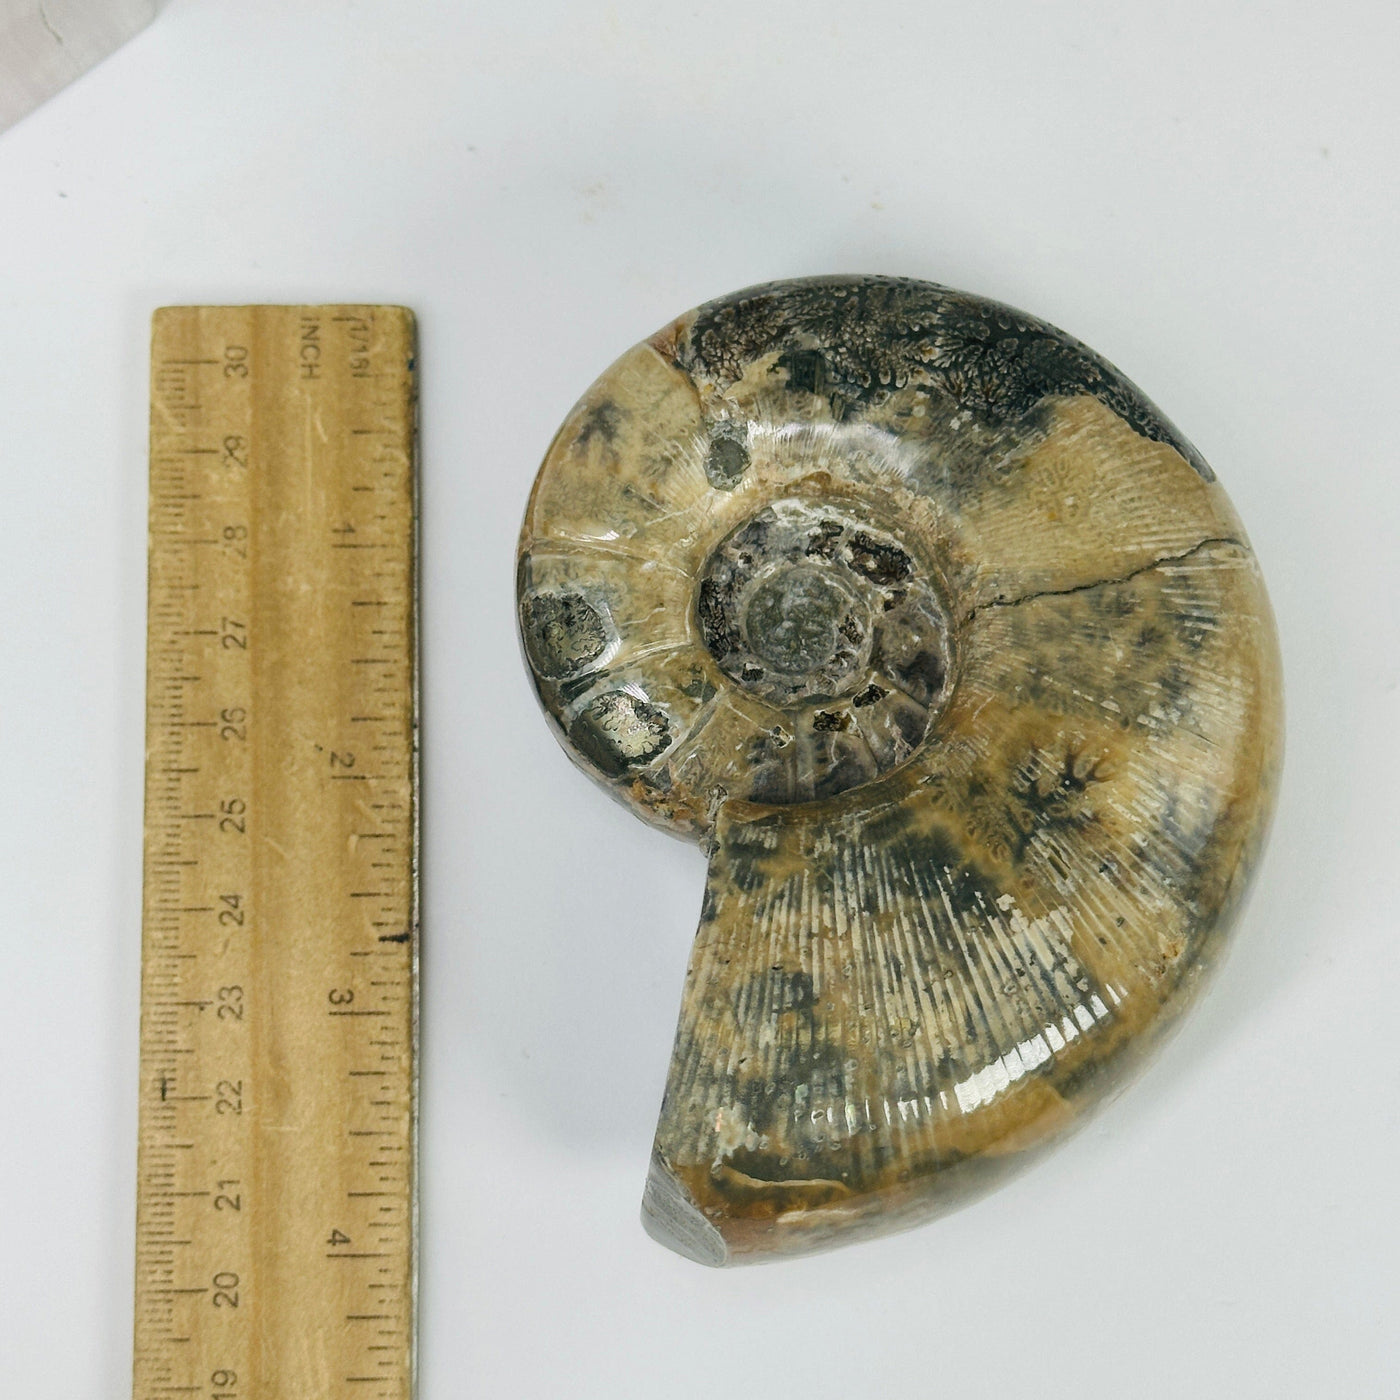 ammonite fossil next to a ruler for size reference